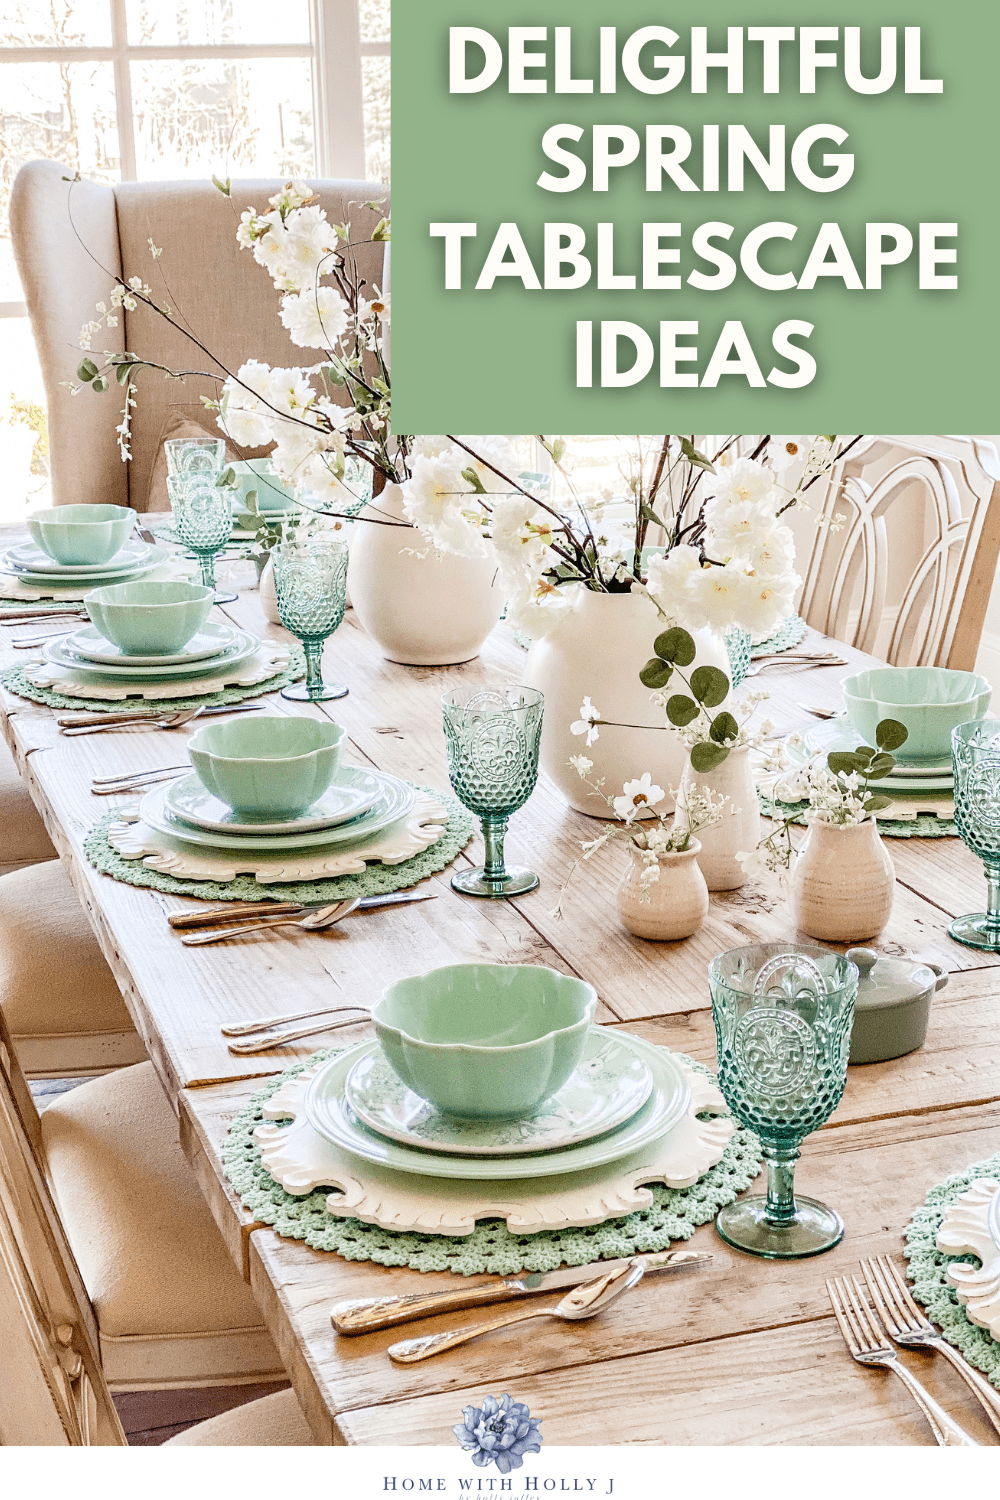 Find the perfect spring tablescape ideas to use this Easter and beyond for a beautiful presentation. Learn how here.